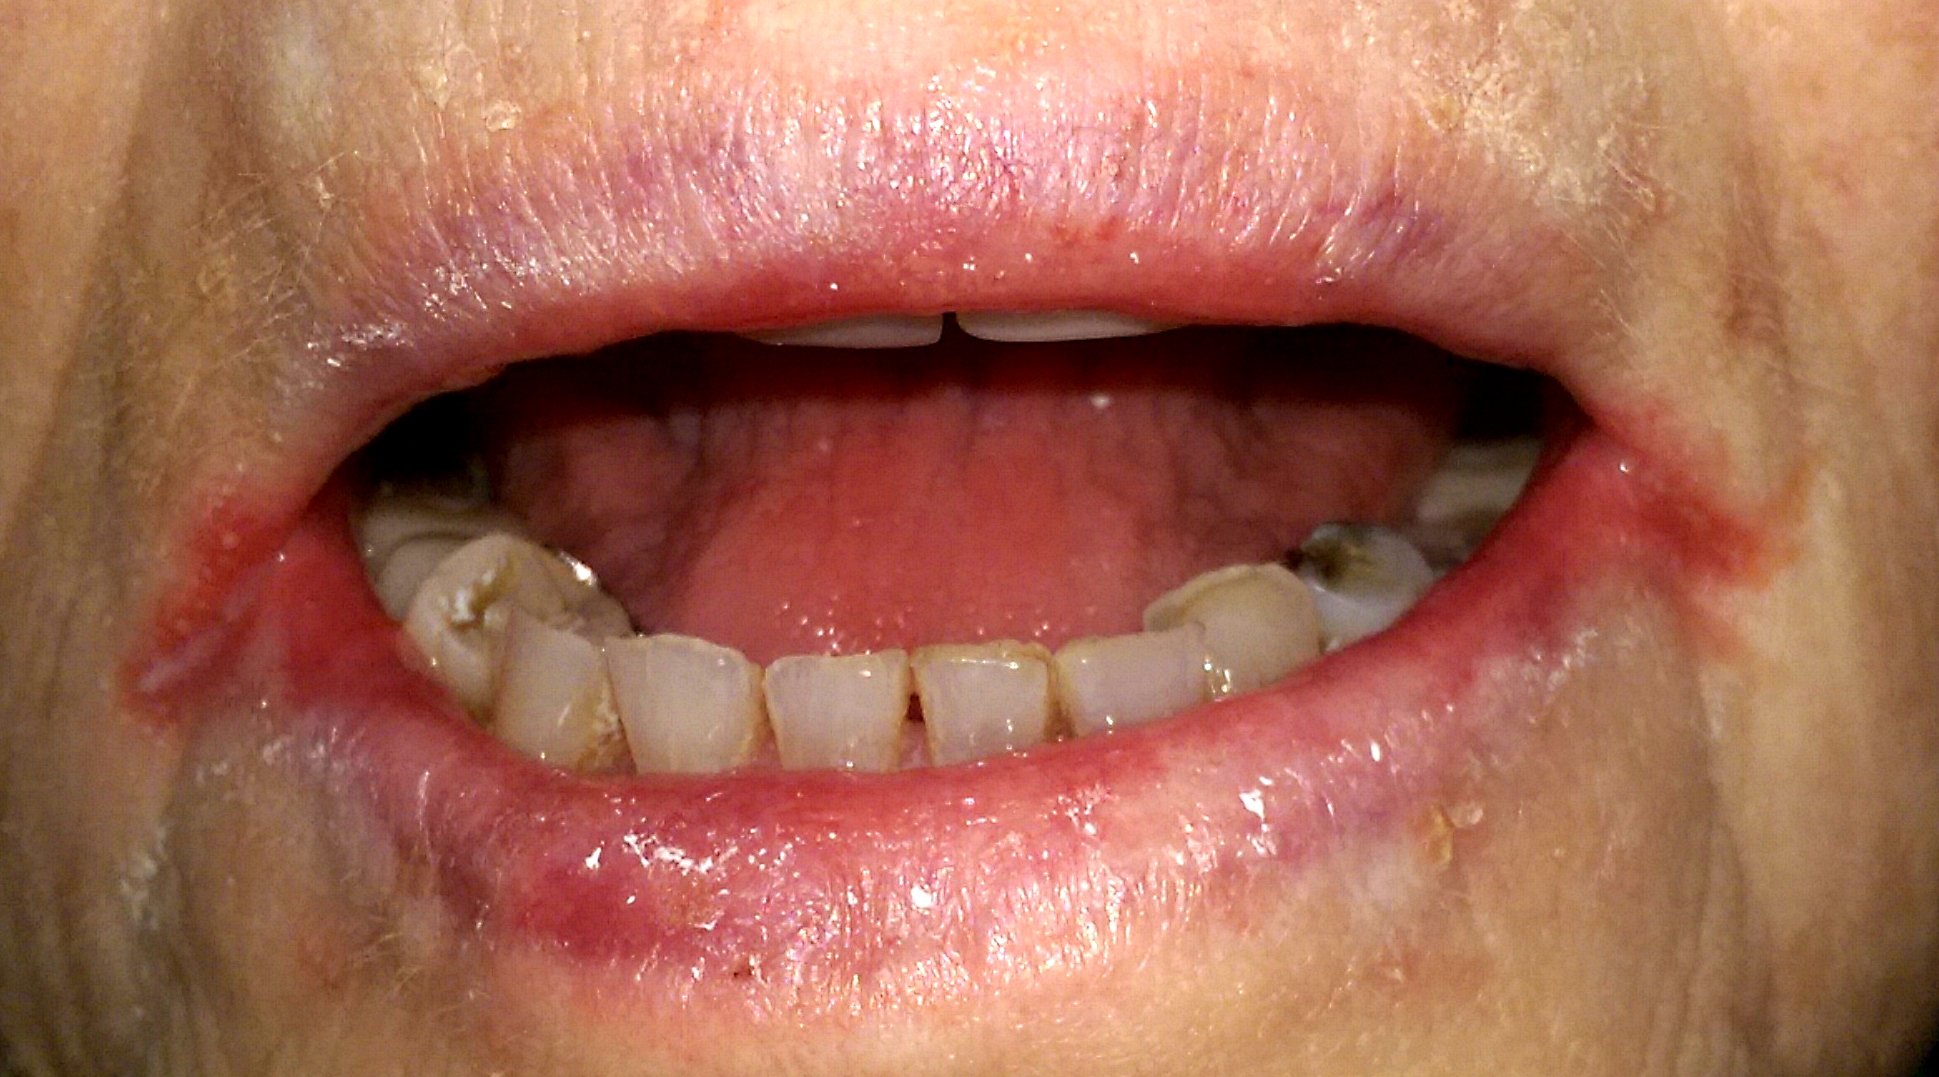 Angular cheilitis in elderly patient with false teeth, iron deficiency anemia and xerostomia. 